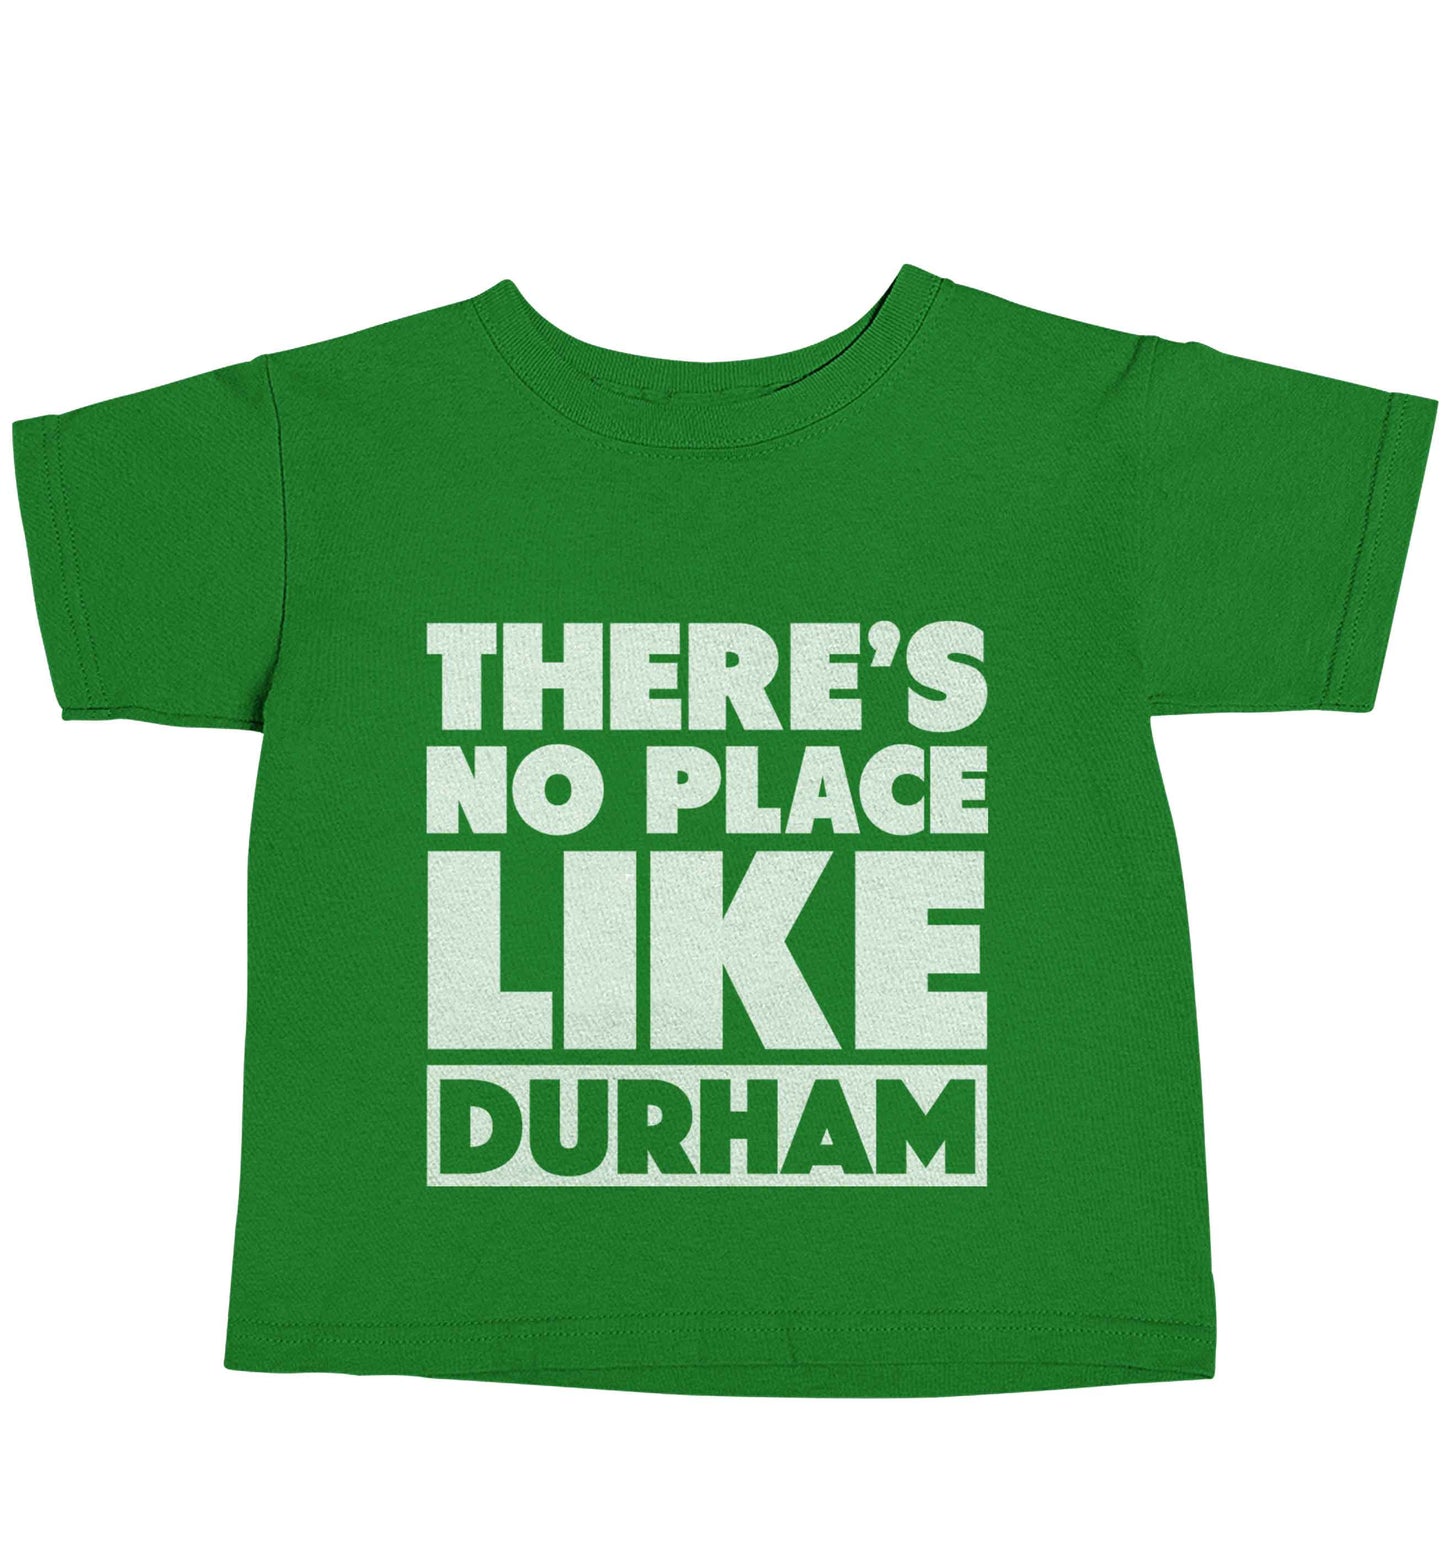 There's no place like Durham green baby toddler Tshirt 2 Years